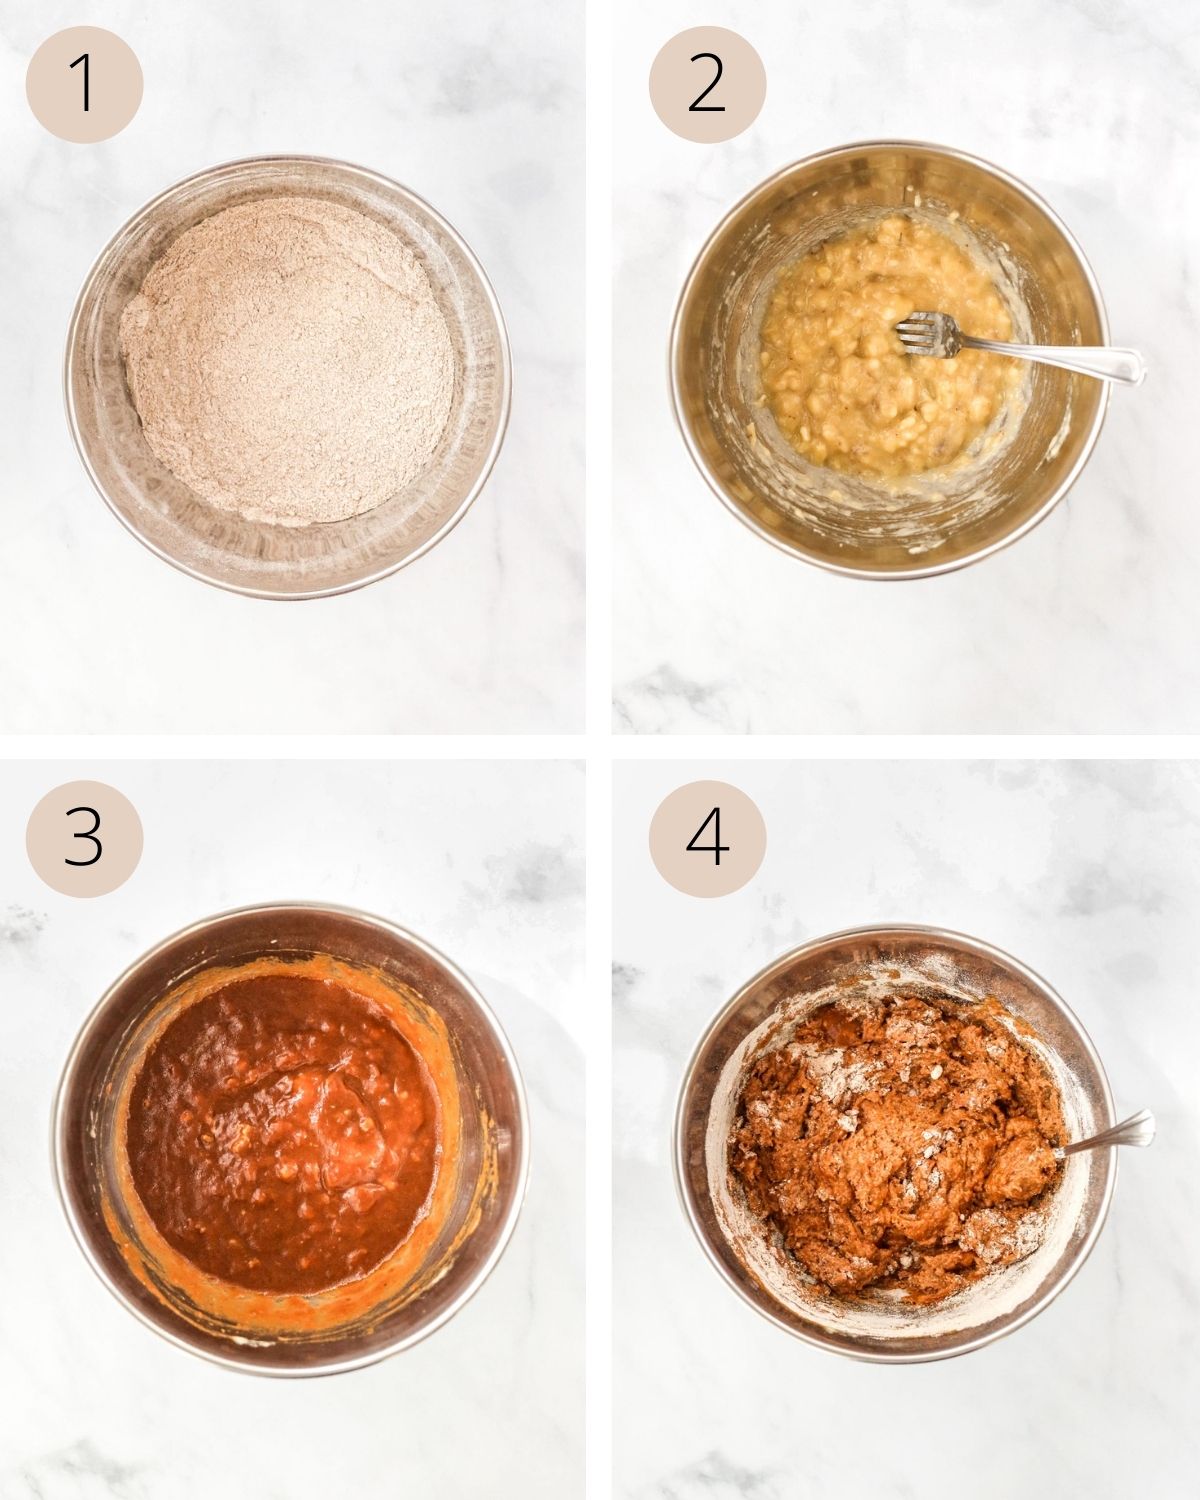 a collage of four images, showing how to mix the dry ingredients, mash banana, add wet ingredients, and form a thick batter.